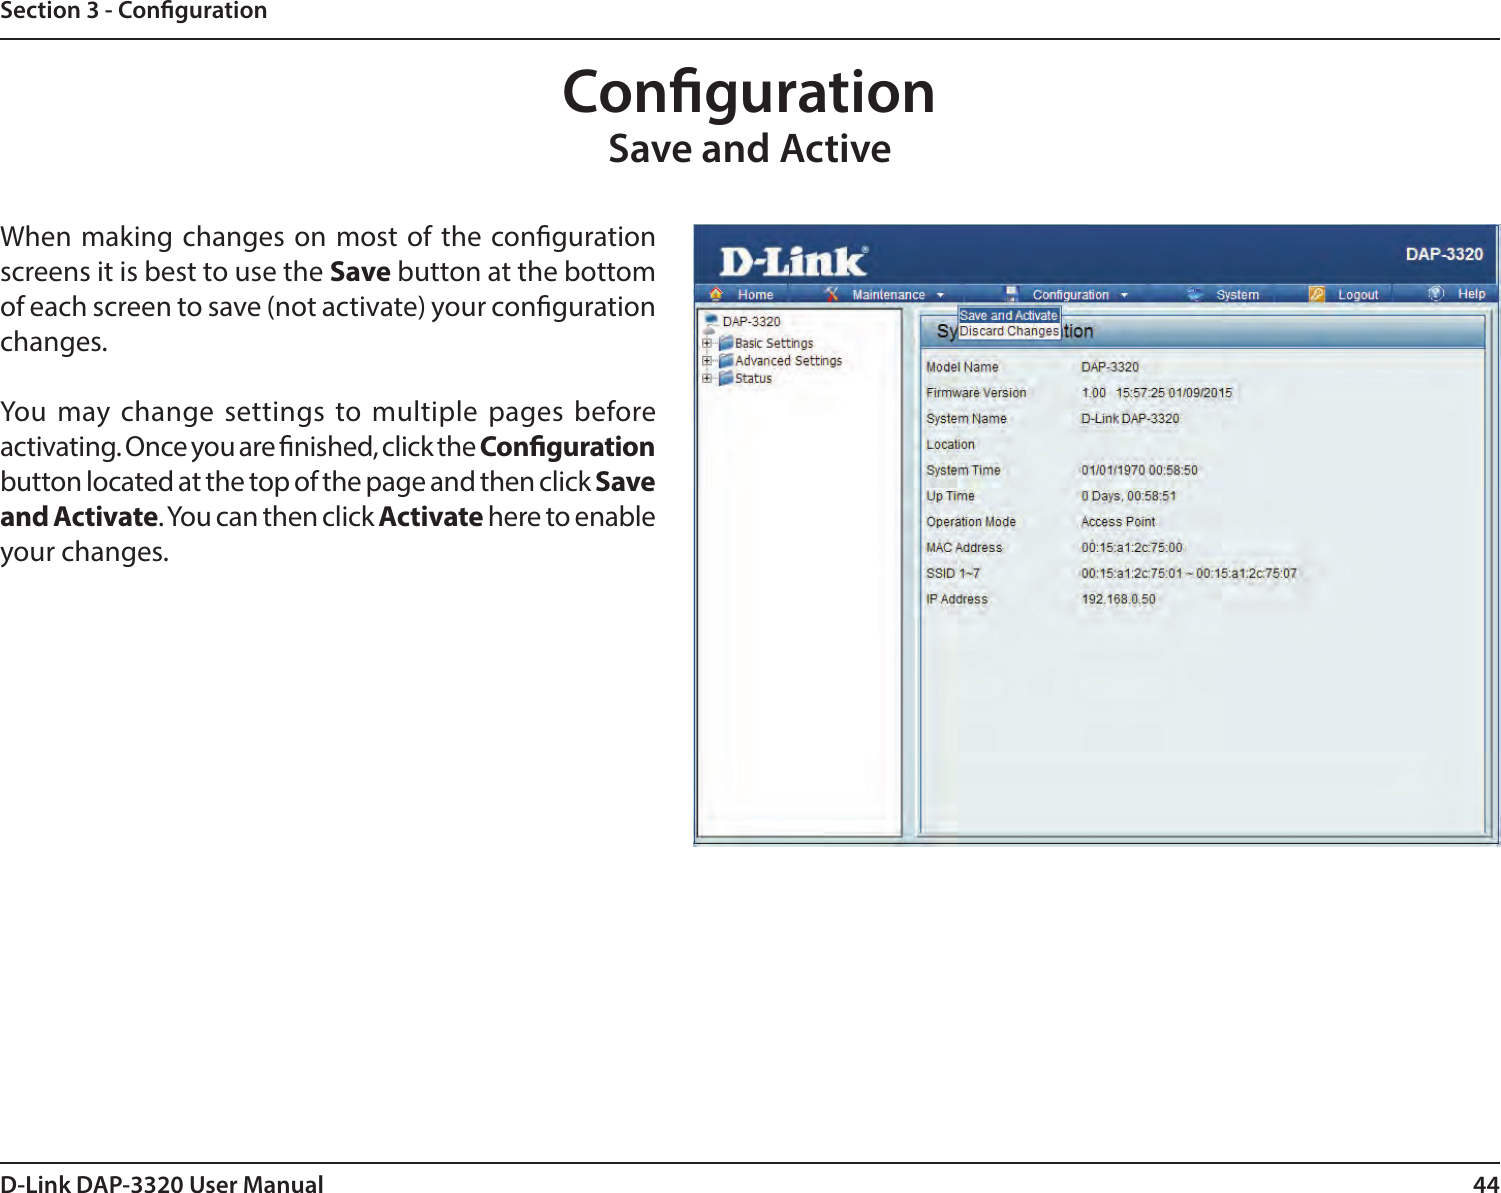 44D-Link DAP-3320 User ManualSection 3 - CongurationCongurationSave and ActiveWhen making changes on most of the conguration screens it is best to use the Save button at the bottom of each screen to save (not activate) your conguration changes.You may change settings to multiple pages before activating. Once you are nished, click the Conguration button located at the top of the page and then click Save and Activate. You can then click Activate here to enable your changes.